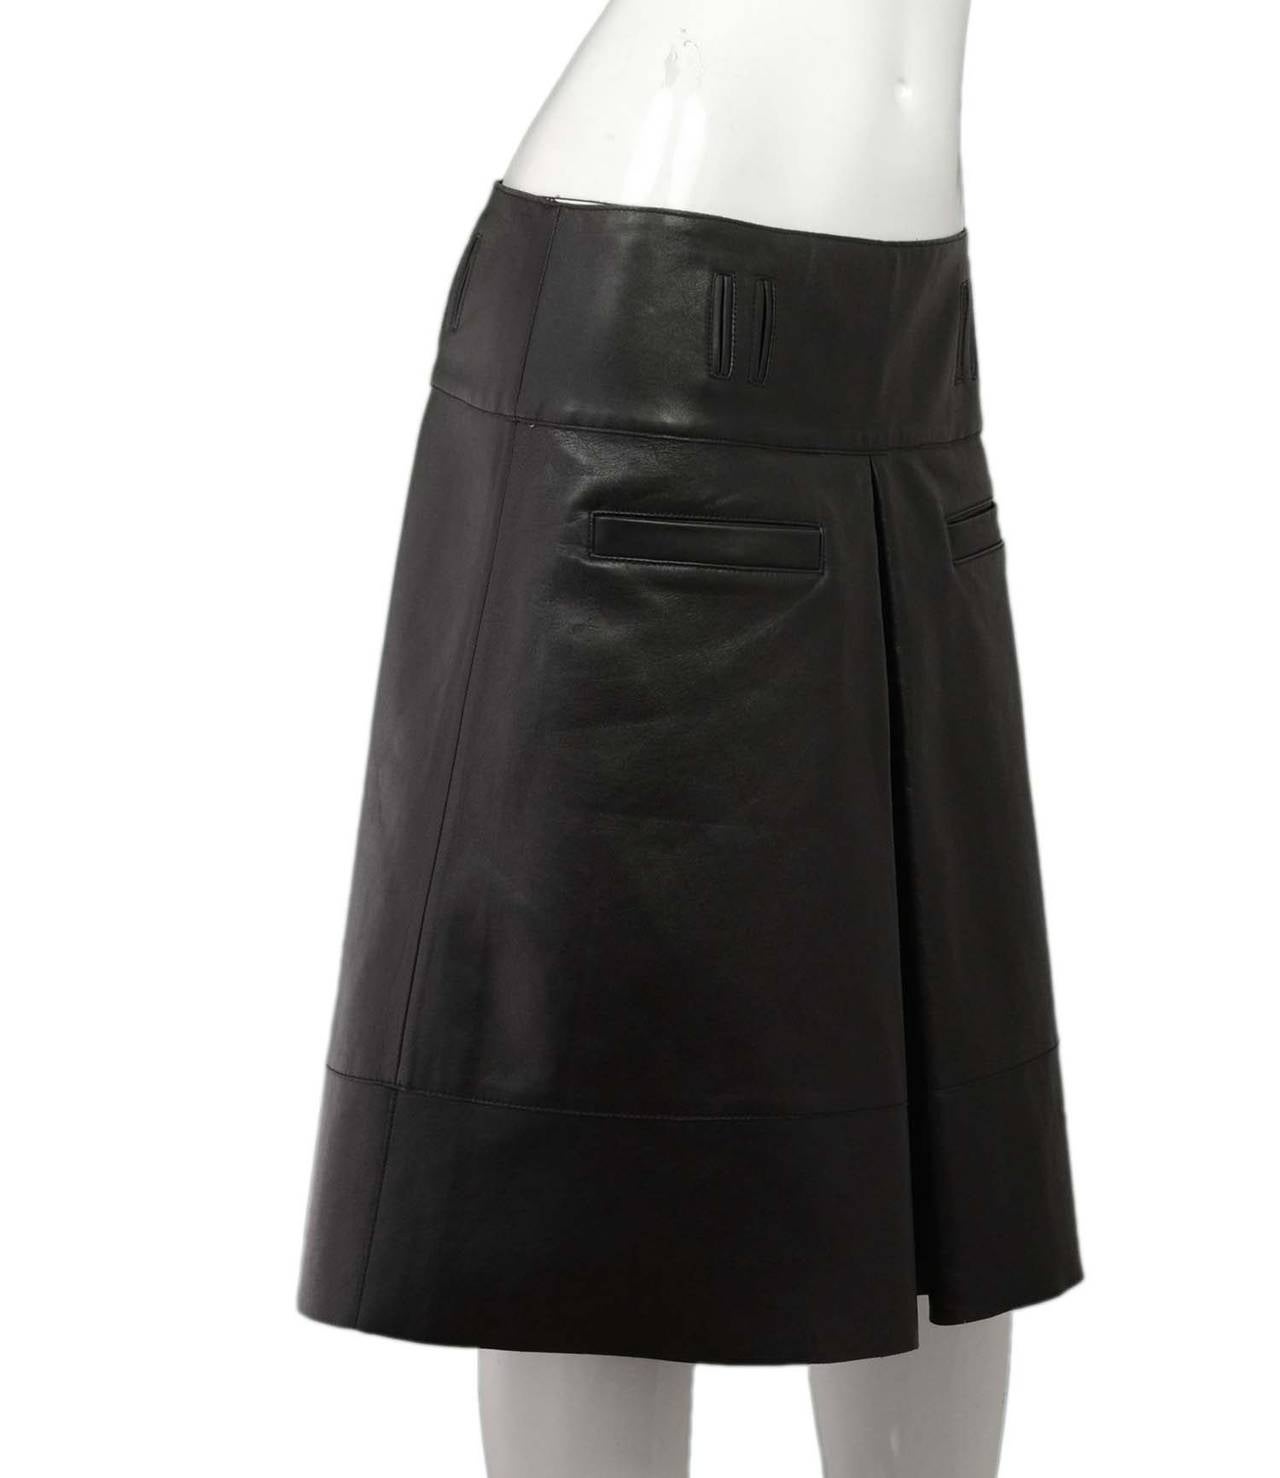 Proenza Schouler Black Leather Pleated A-Line Skirt
Features four belt loops- belt not provided

    Made in: Not given
    Color: Black
    Composition: Leather
    Lining: Black silk-blend textile
    Closure/opening: Side zipper
   